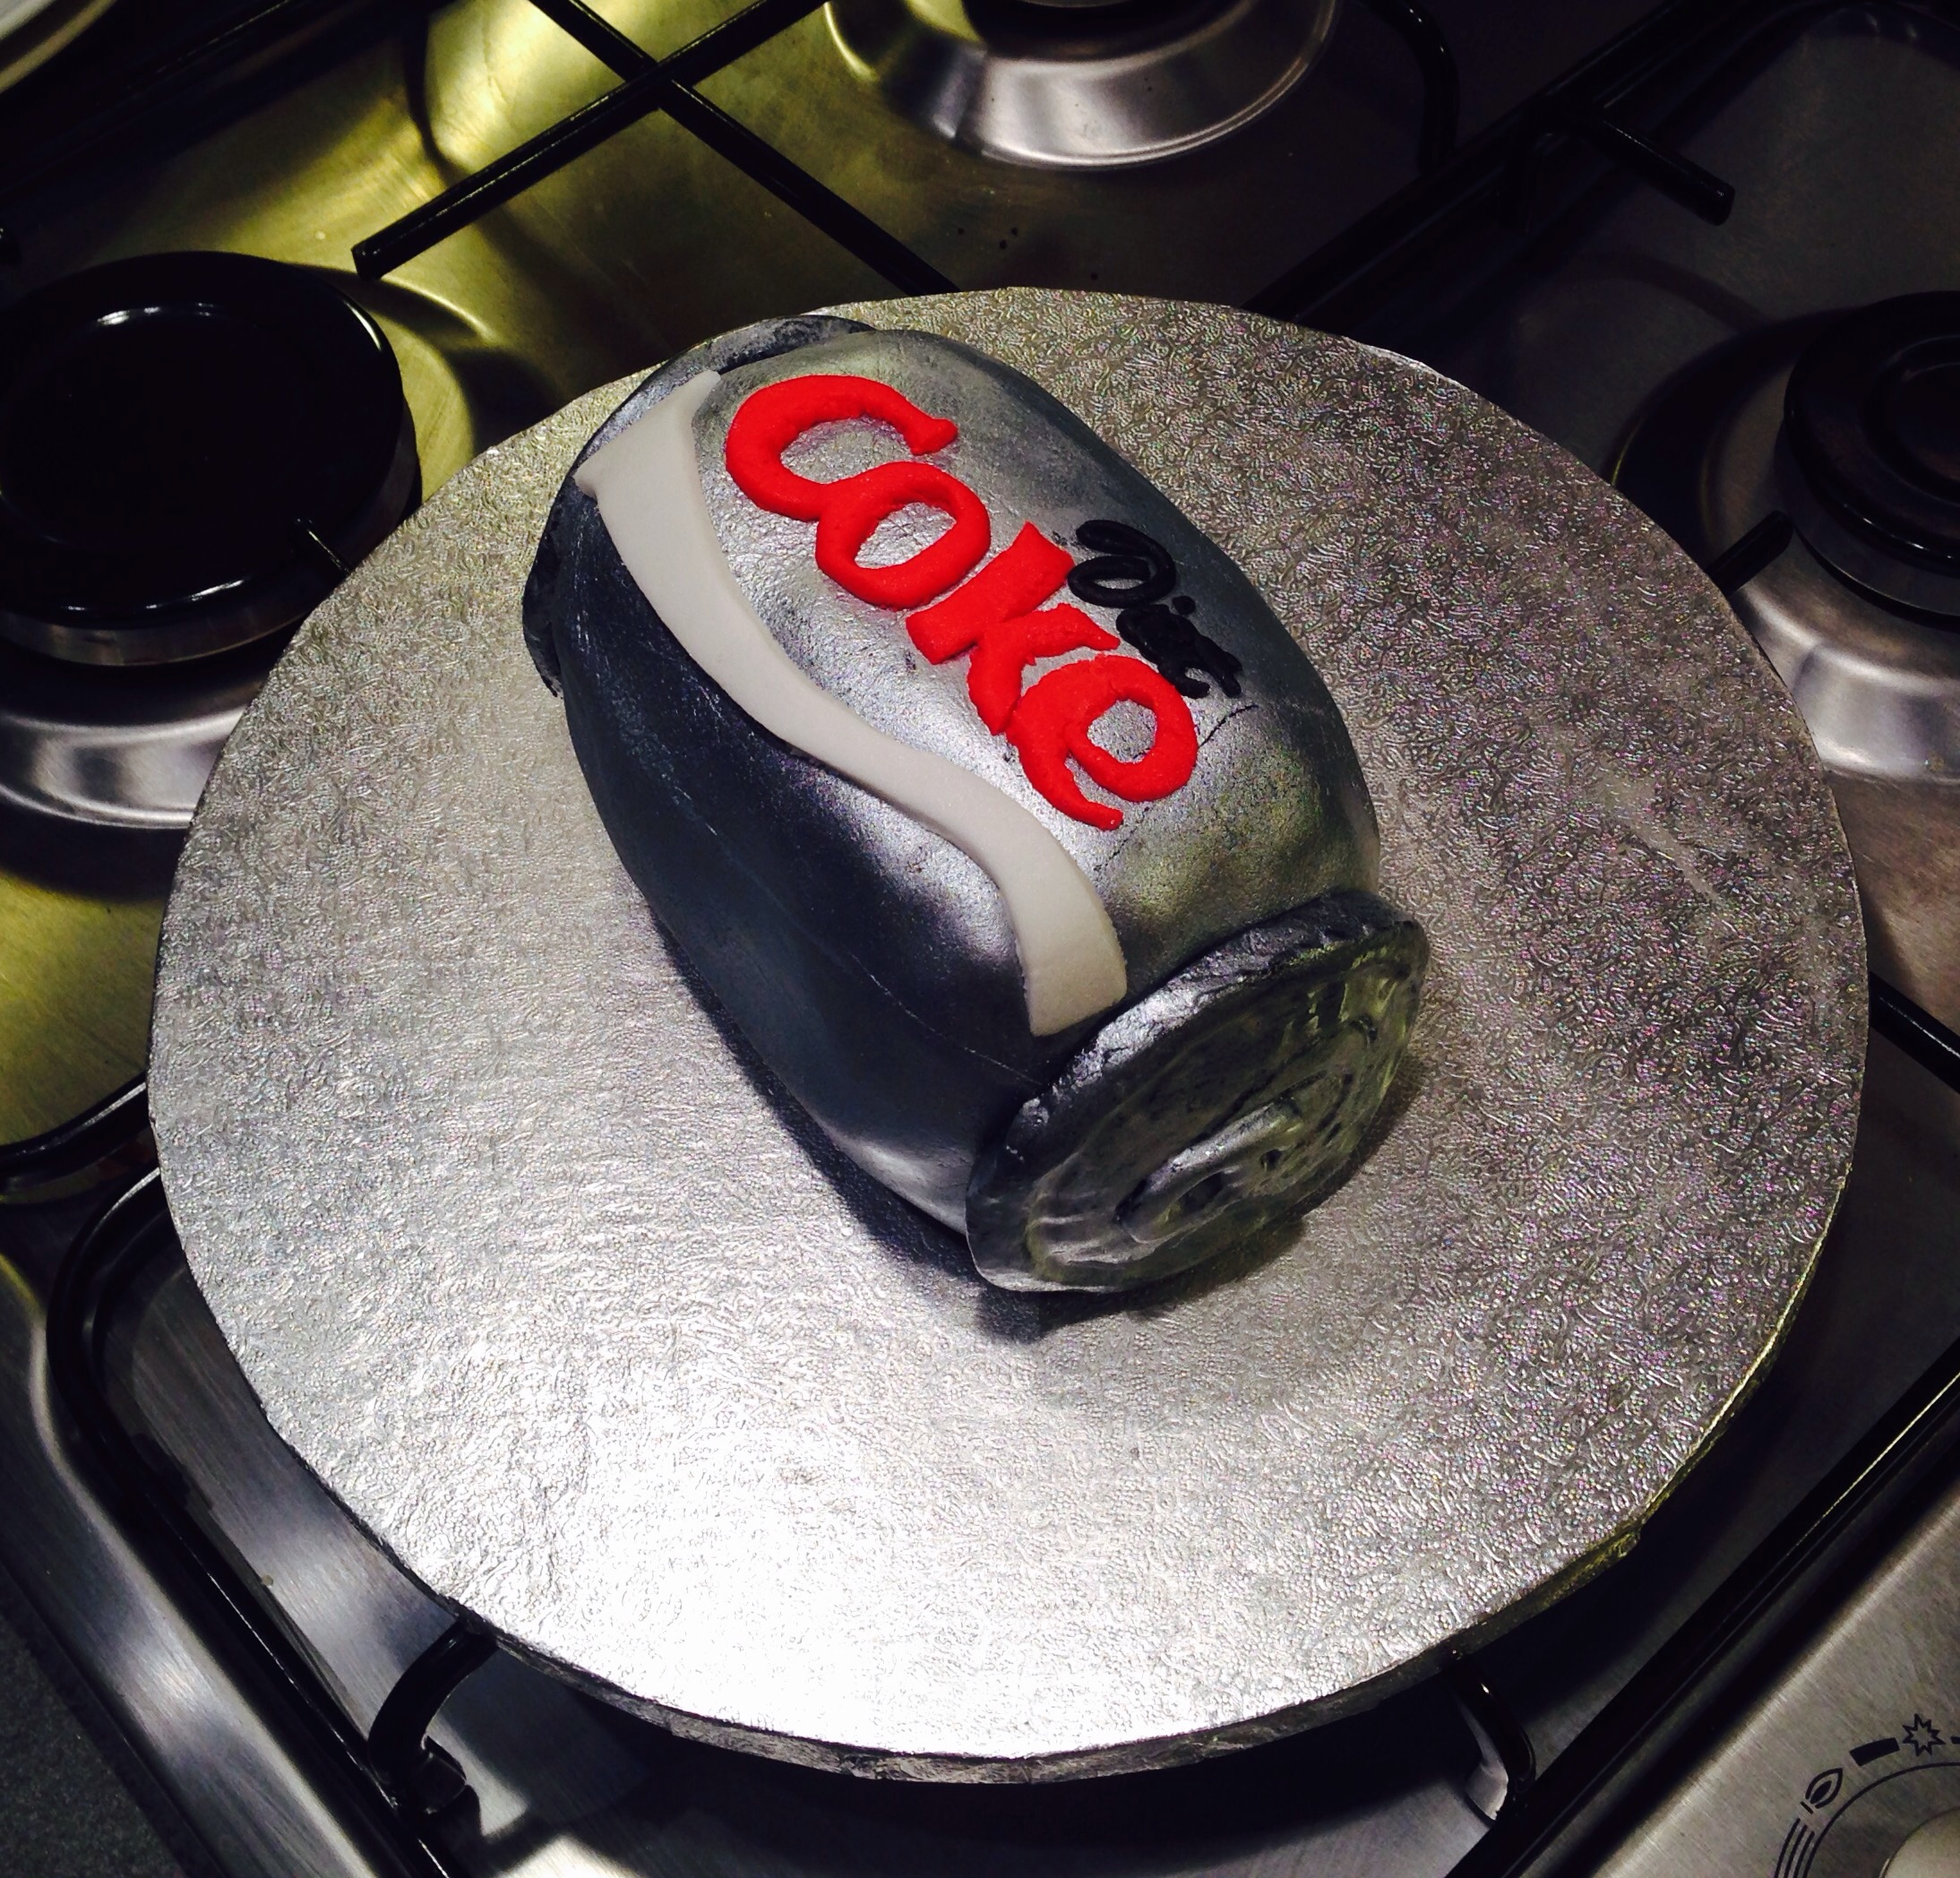 Diet Coke Can Cake - Decorated Cake by Angela - A Slice - CakesDecor